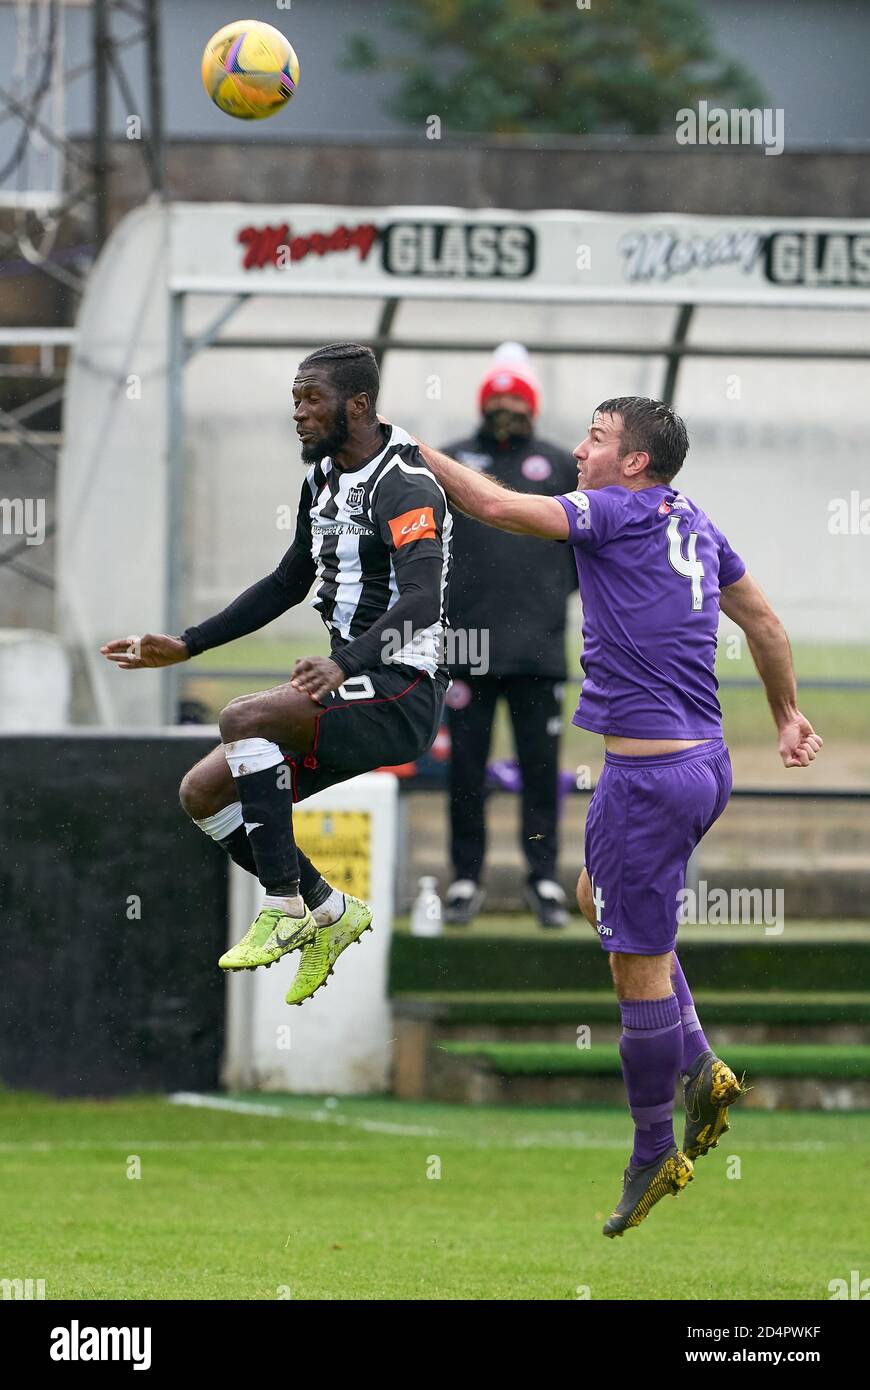 Elgin City FC, Borough Briggs, Elgin, Moray, UK. 10th Oct, 2020. UK. This is from the Betfred Cup Football Match between Elgin City and Stirling Albion. PICTURE CONTENT:- L - 10 - Elgin - Smart Osadolor and R - 4 Stirling - Paul MacLean Credit: JASPERIMAGE/Alamy Live News Stock Photo